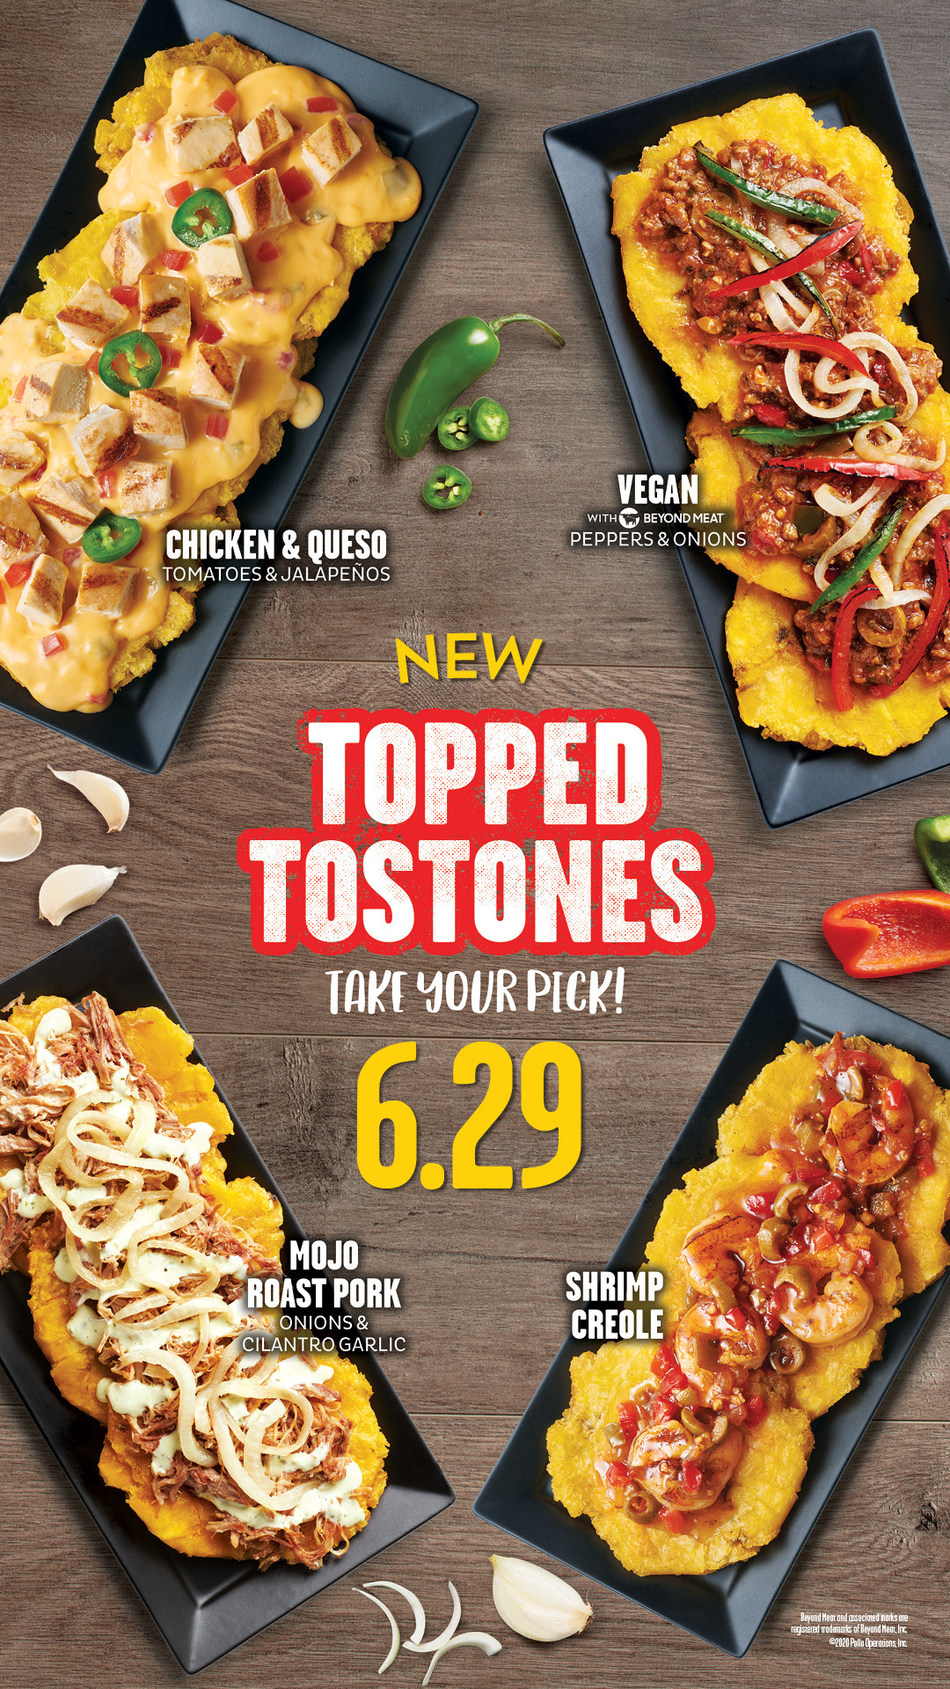 Pollo Tropical® Tops Menu With Addition Of Topped Tostones And Shrimp